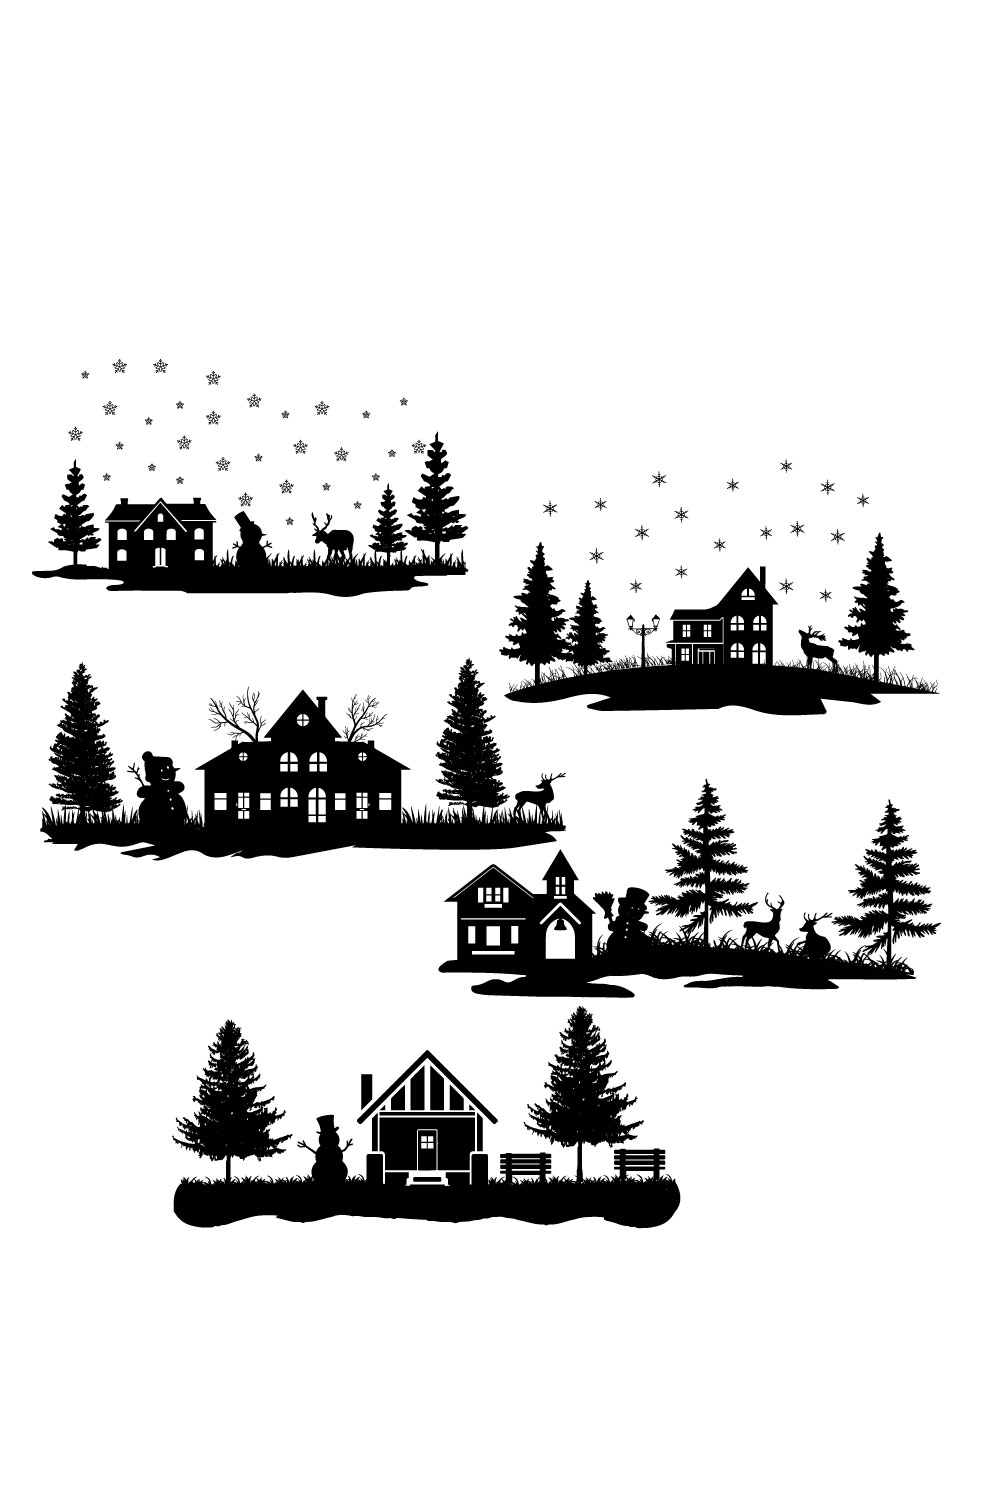 A selection of unique images of silhouettes of Christmas houses